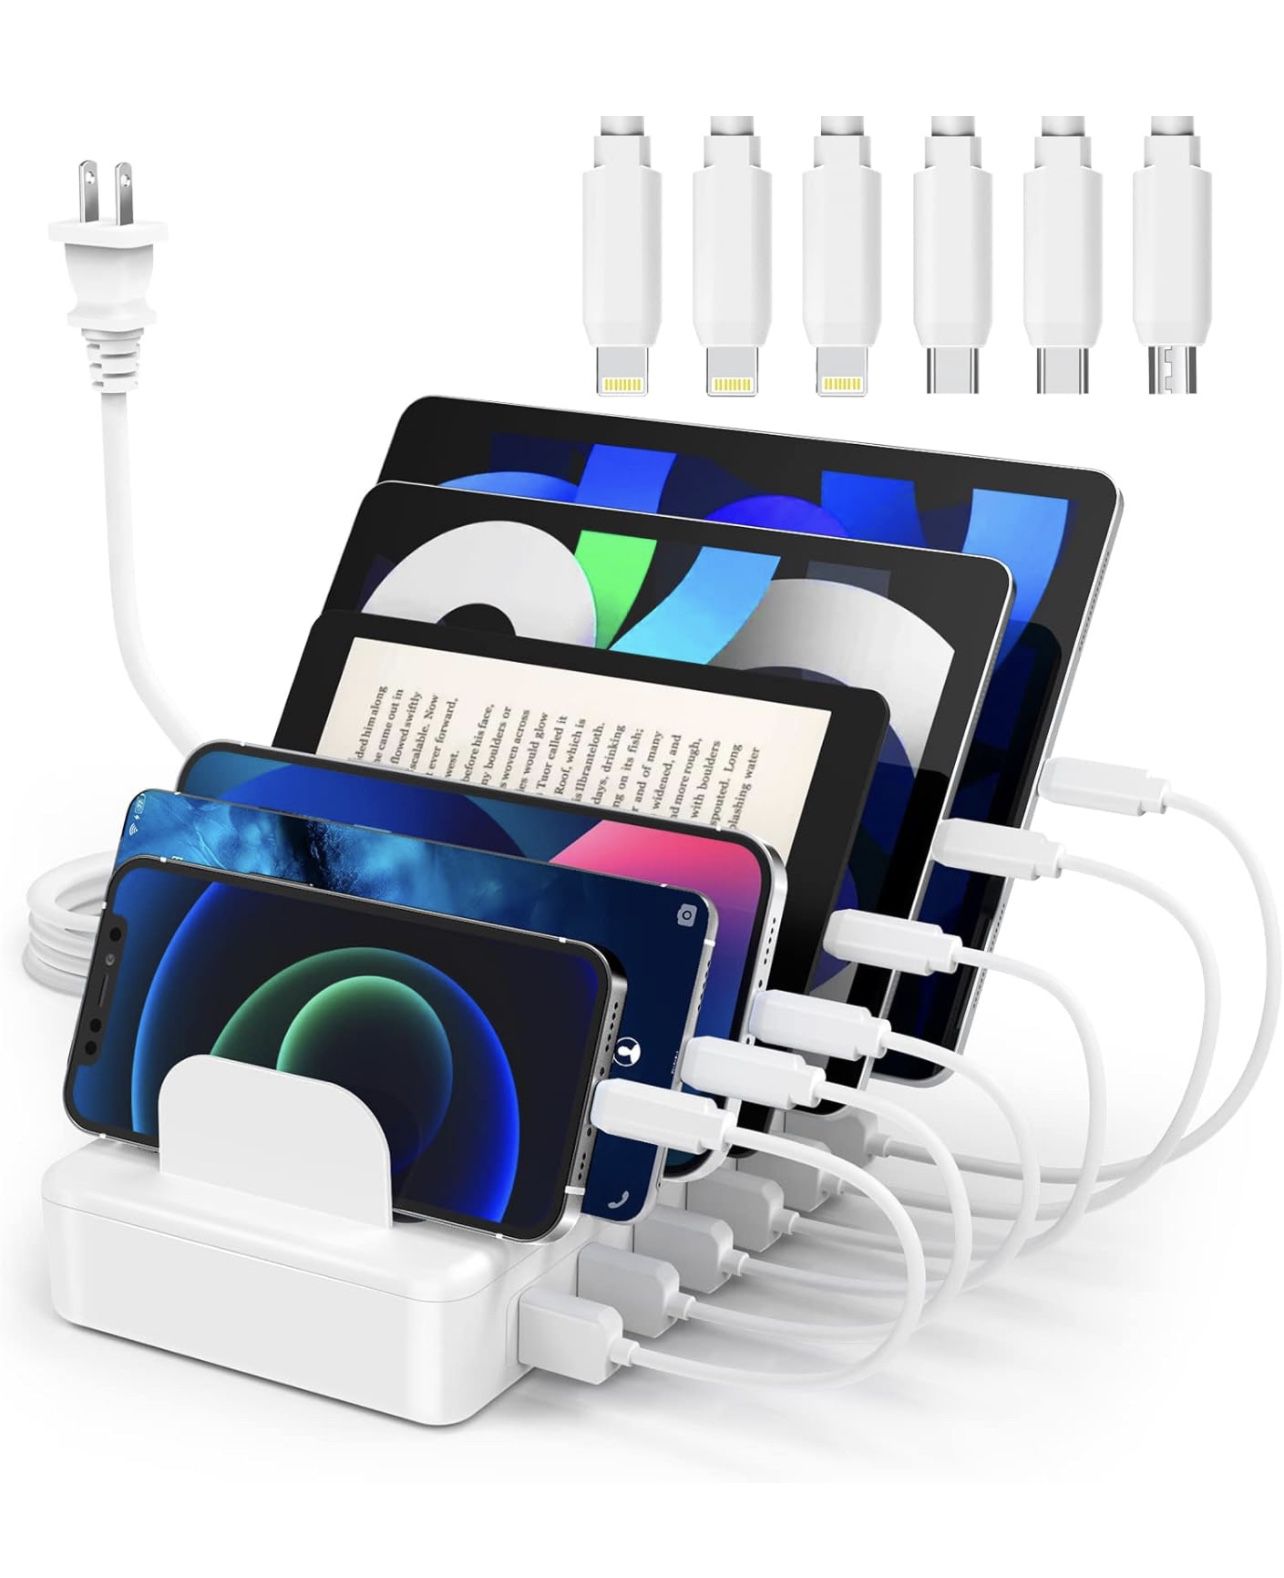 50W 6 Ports USB Charging Station Organizer with 6 Cables Compatible with Cellphone, Tablet, Kindle, and Other Electronic (White)